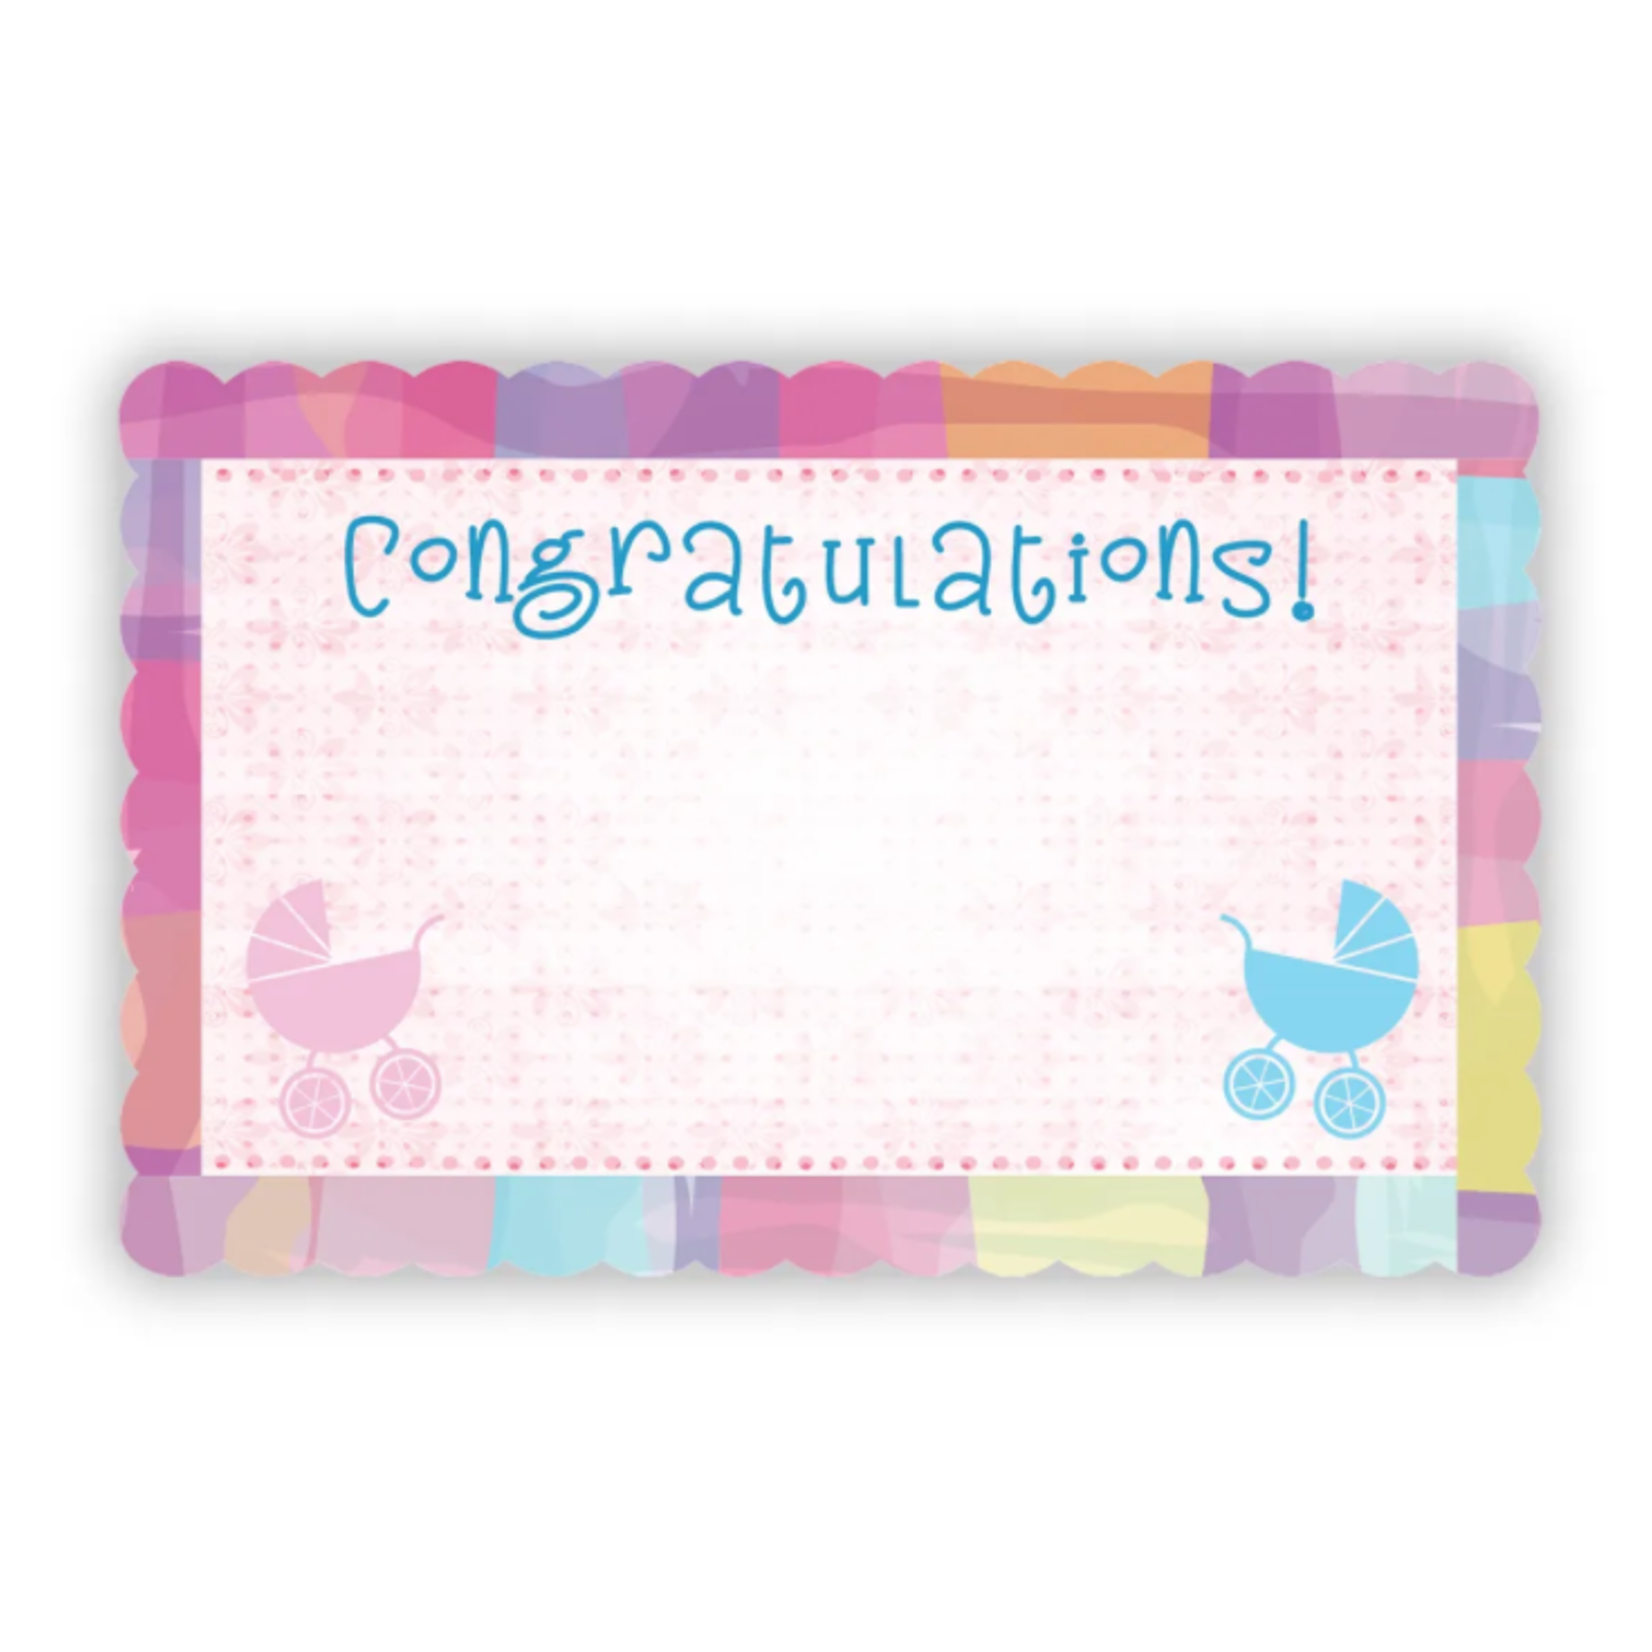 "Congratulations" : Colorful border with embossed carriages